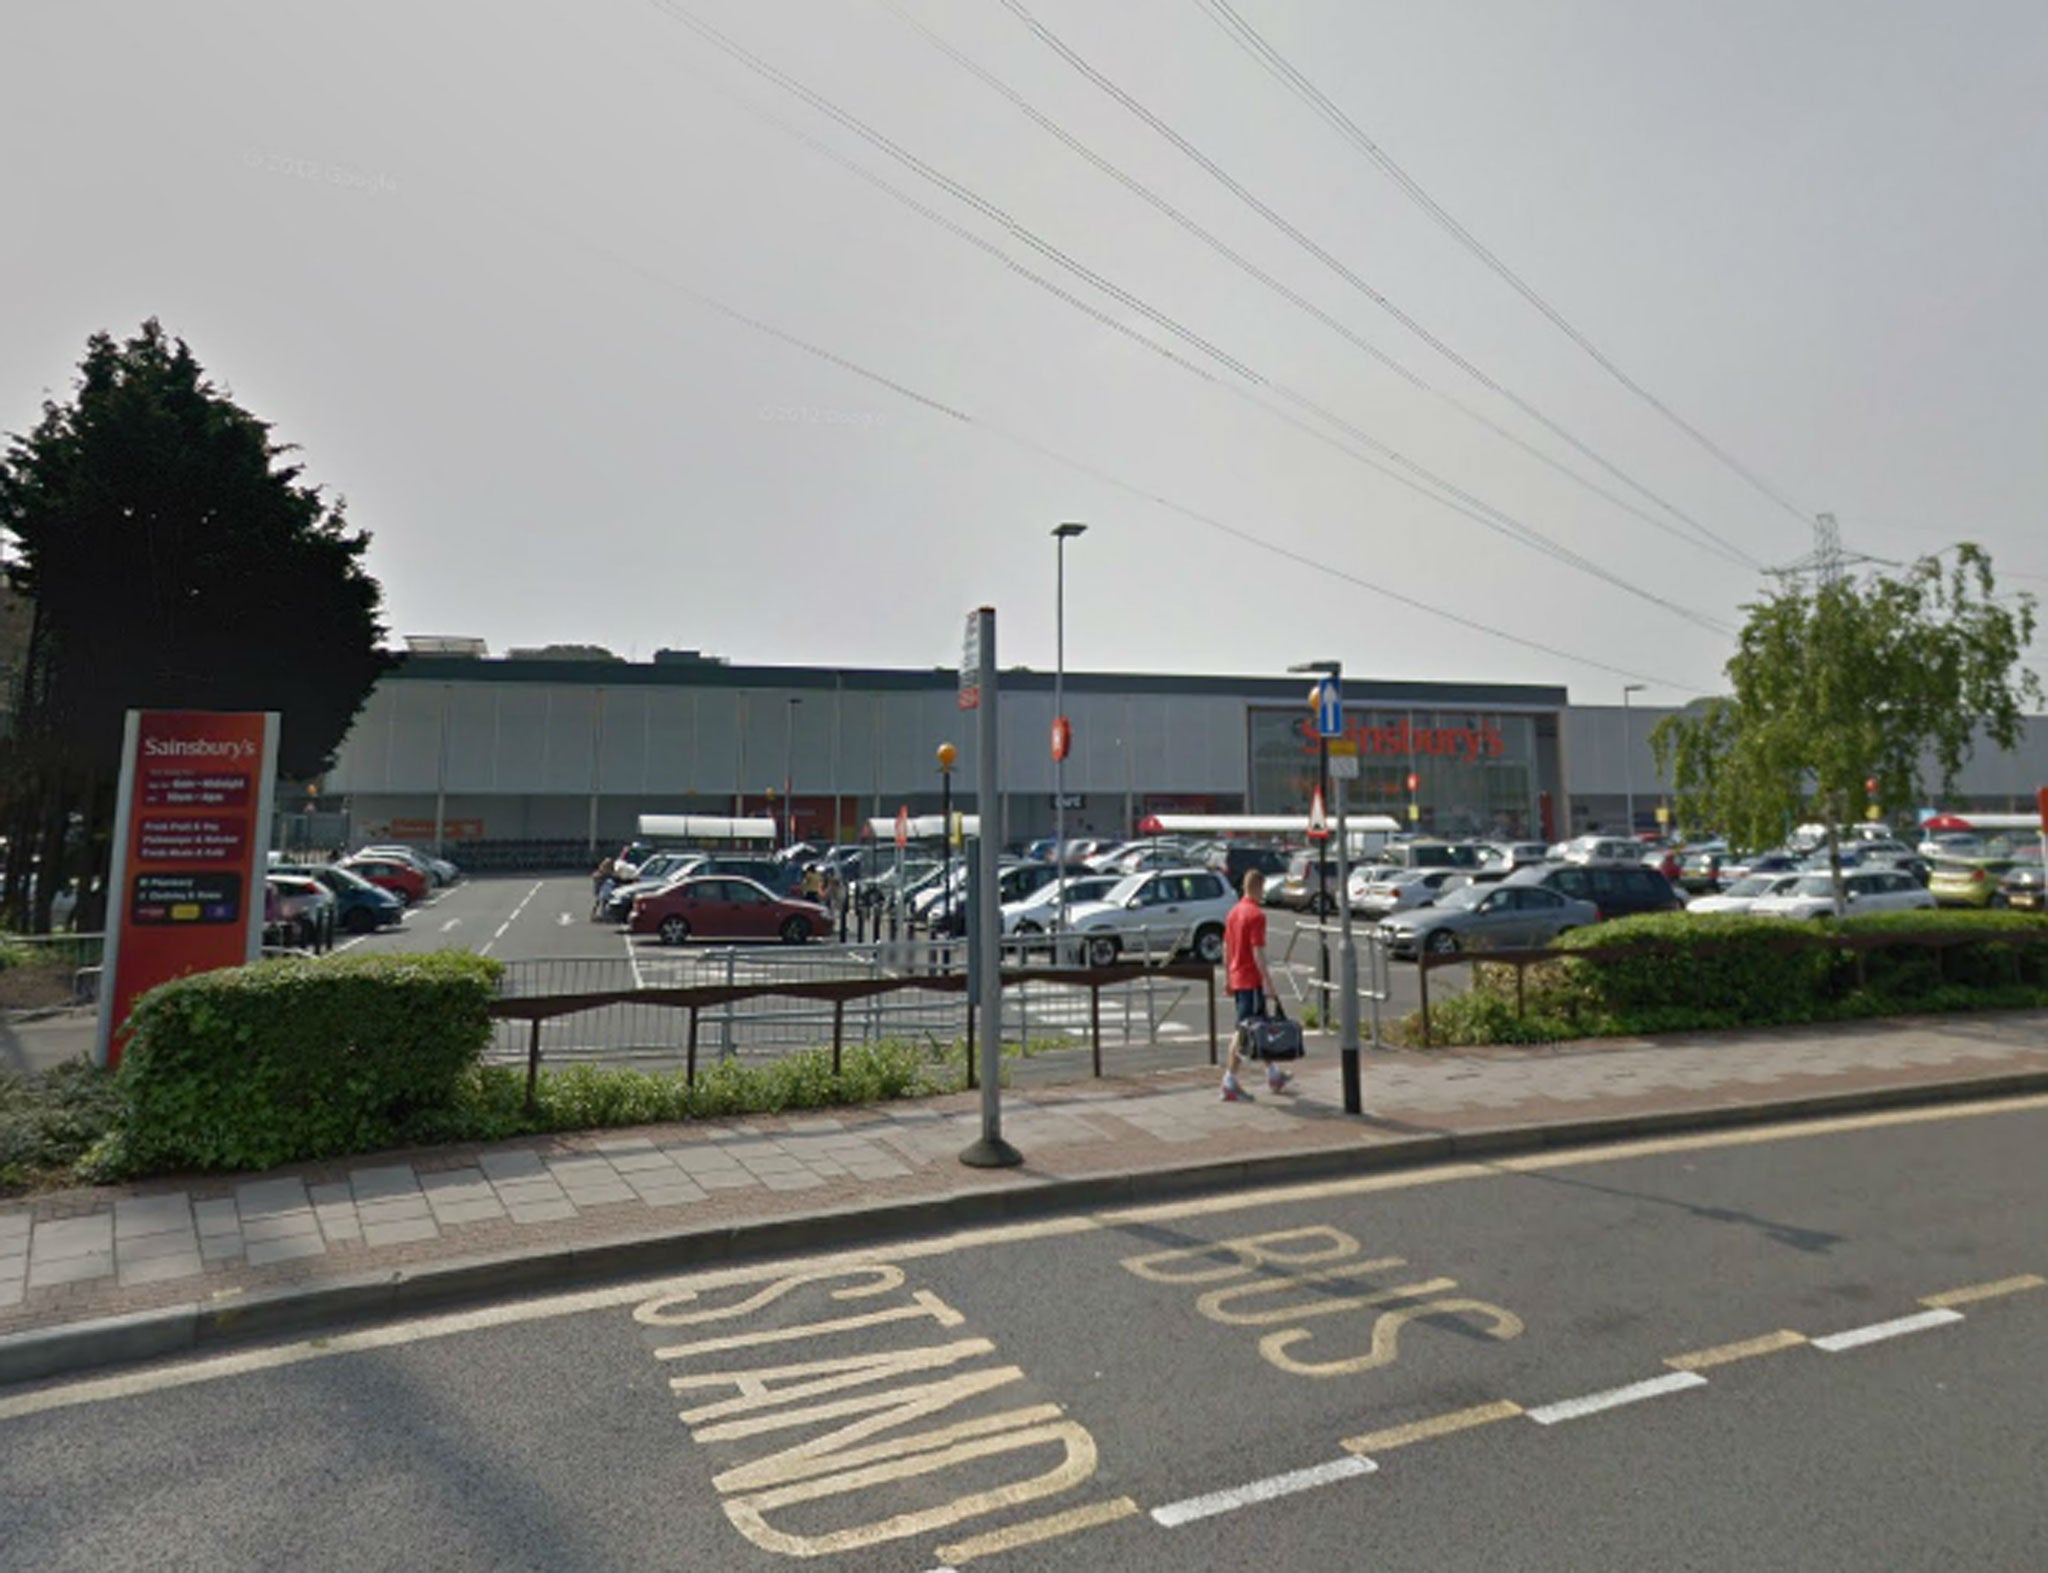 The Crayford branch of Sainsbury's, where a national debate was spawned